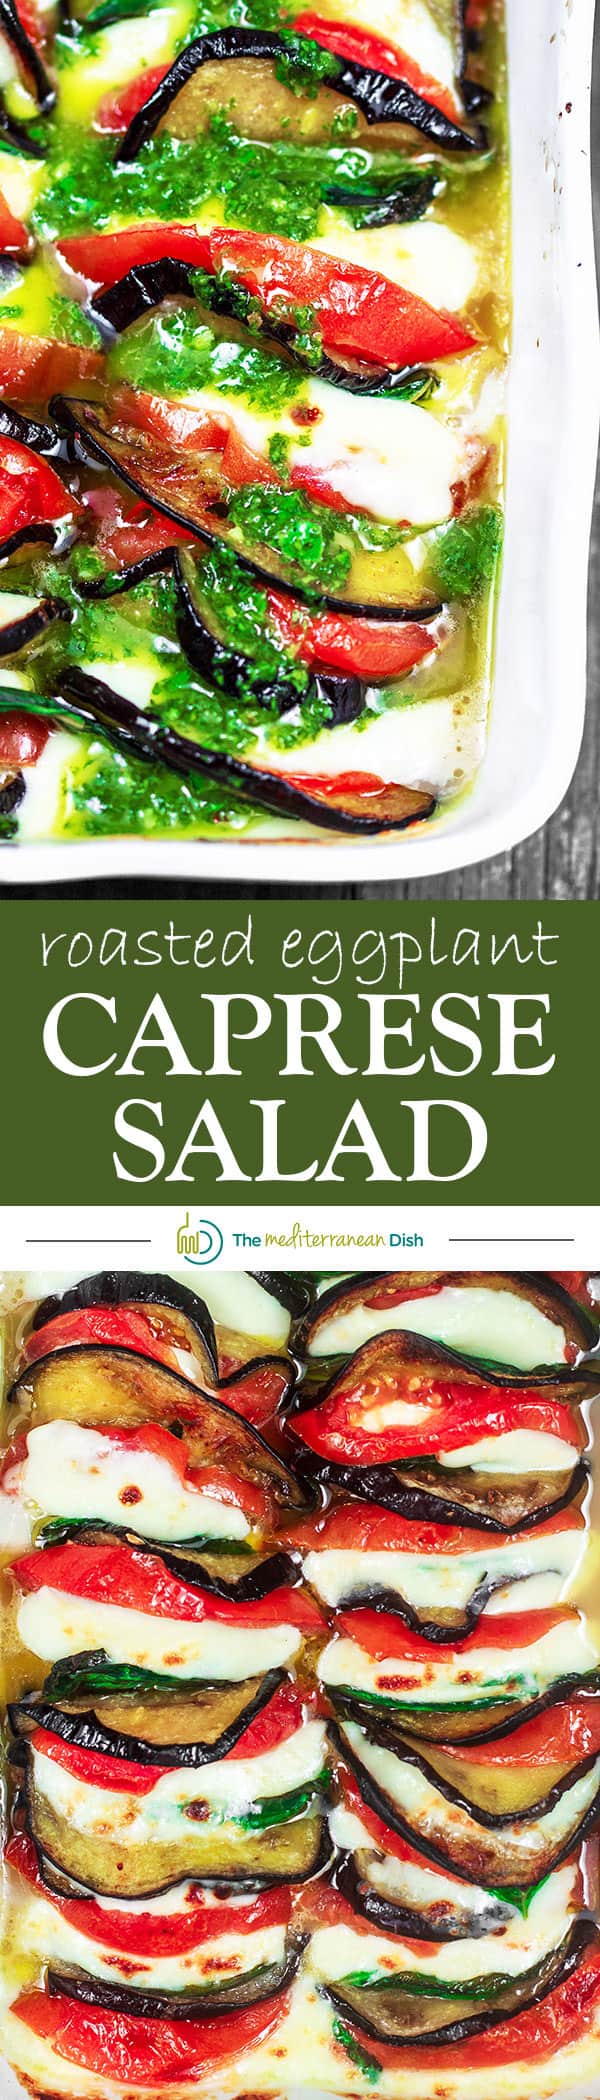 Roasted Eggplant Caprese Salad Recipe | The Mediterranean Dish. A satisfying appetizer or even side dish! Roasted eggplants, tomatoes, and melted mozzeralla cheese with basil nestled in between. Dressed in a simple basil viniagrette! See the step-by-step tutorial on The Mediterranean Dish